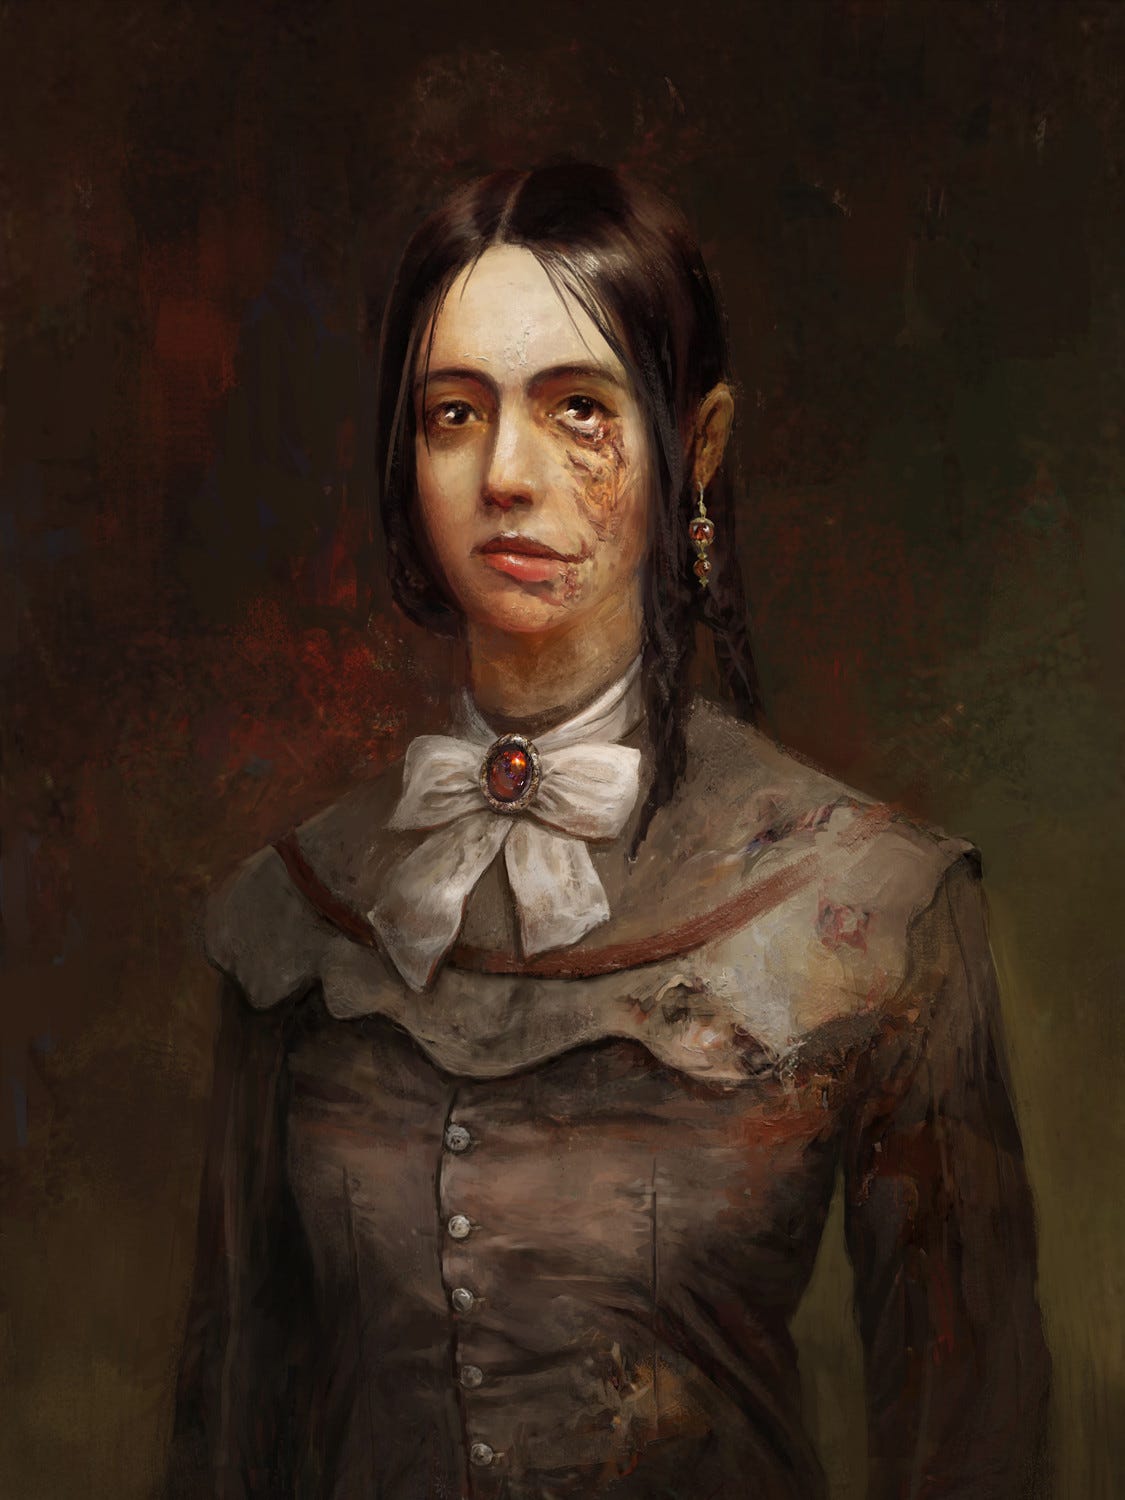 The completed painting of The Wife from Layers of Fear, complete with distortion on the left side of her face which emulates how she was disfigured by a fire in her past.